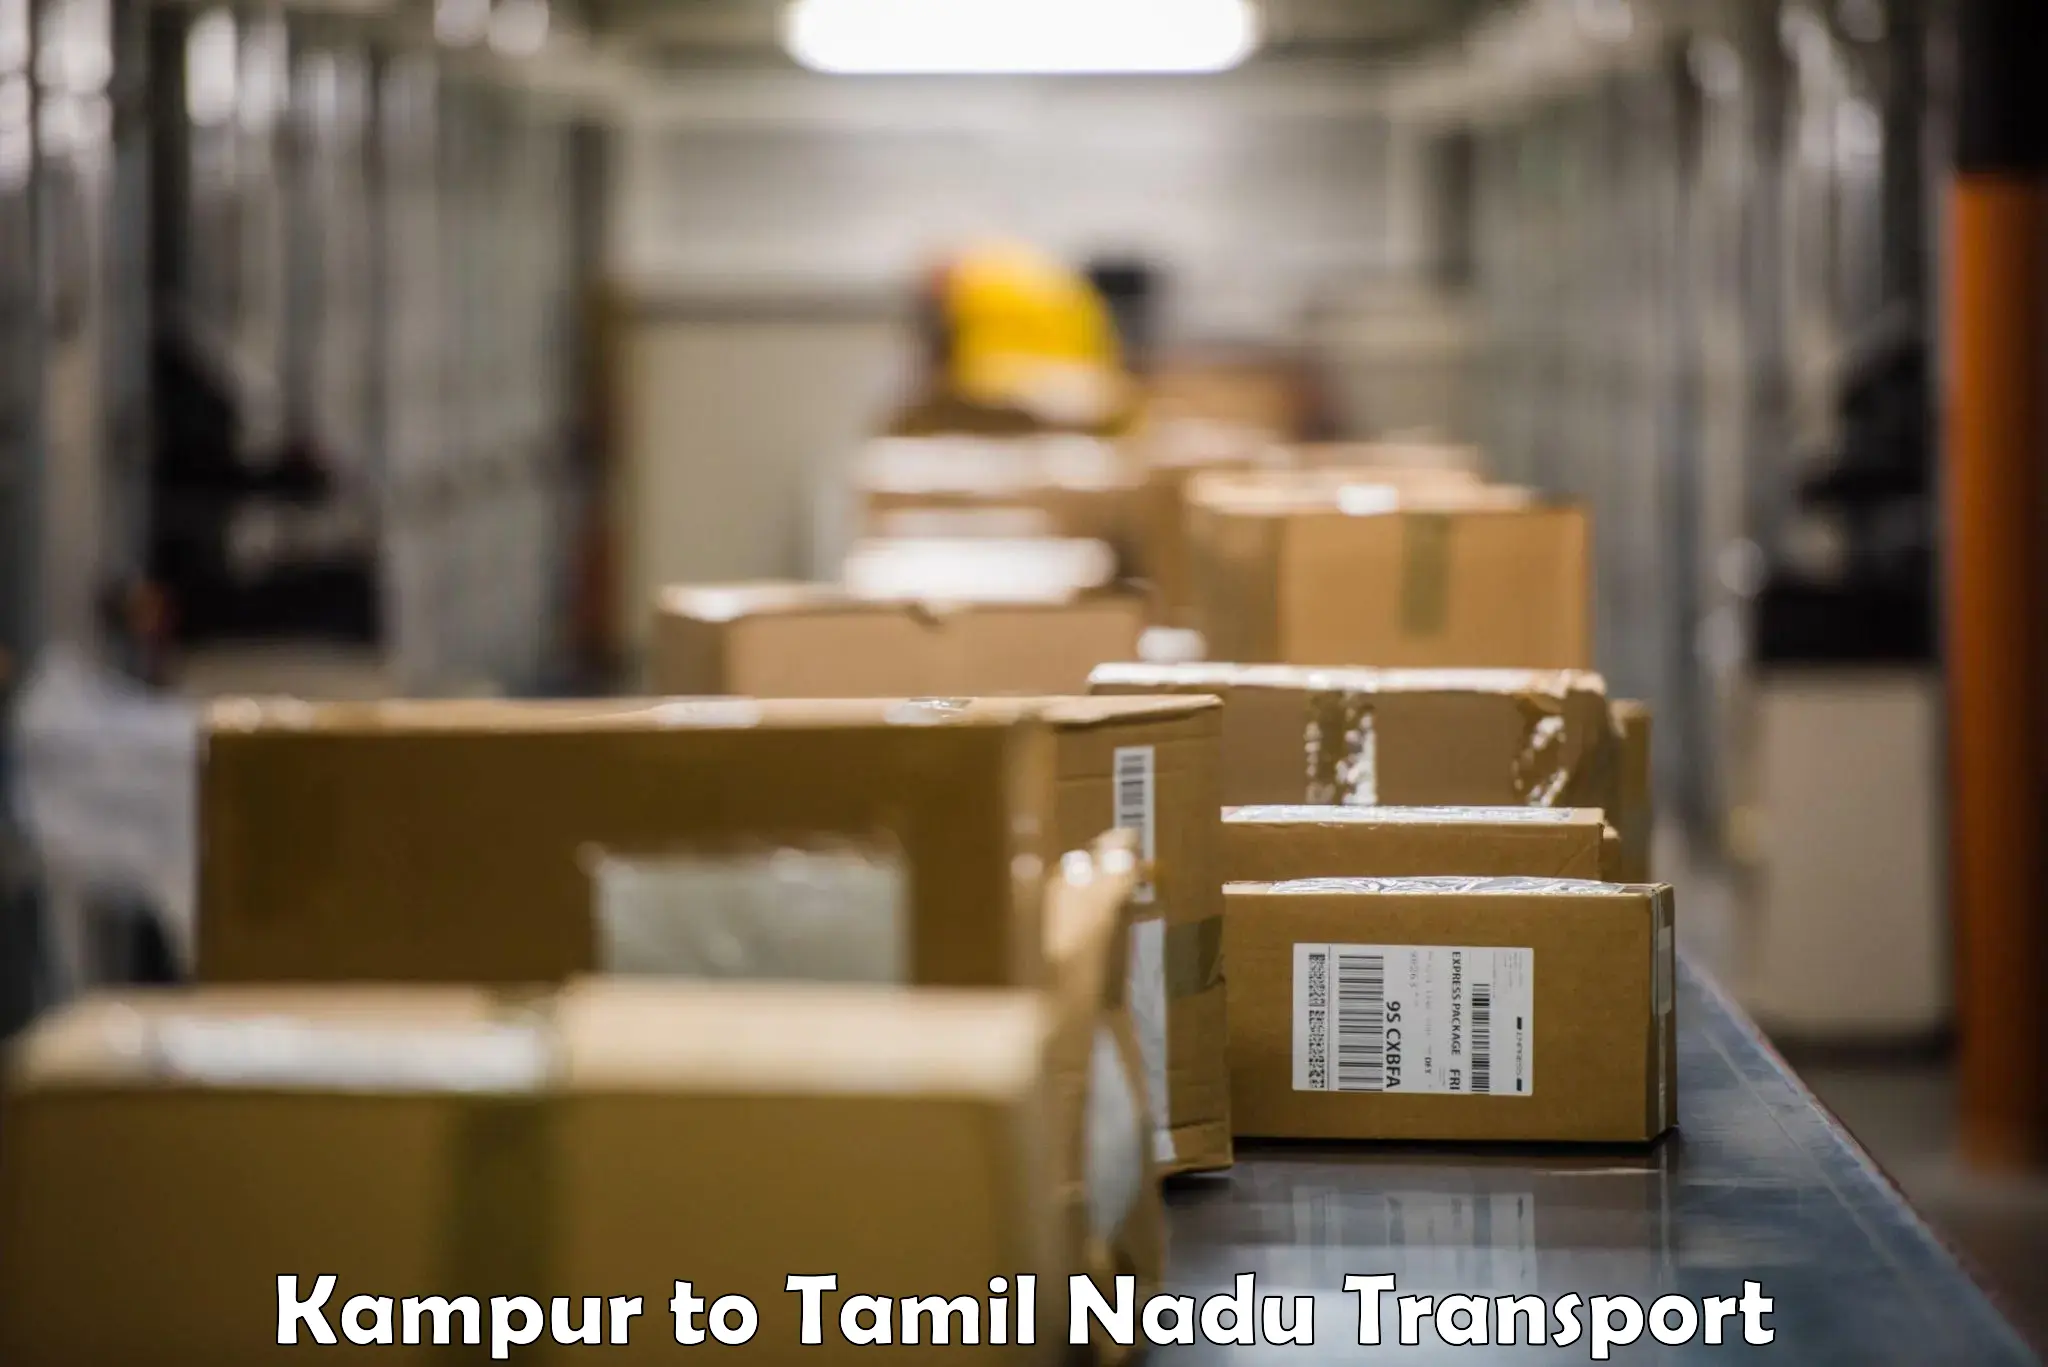 Daily parcel service transport in Kampur to Thondi